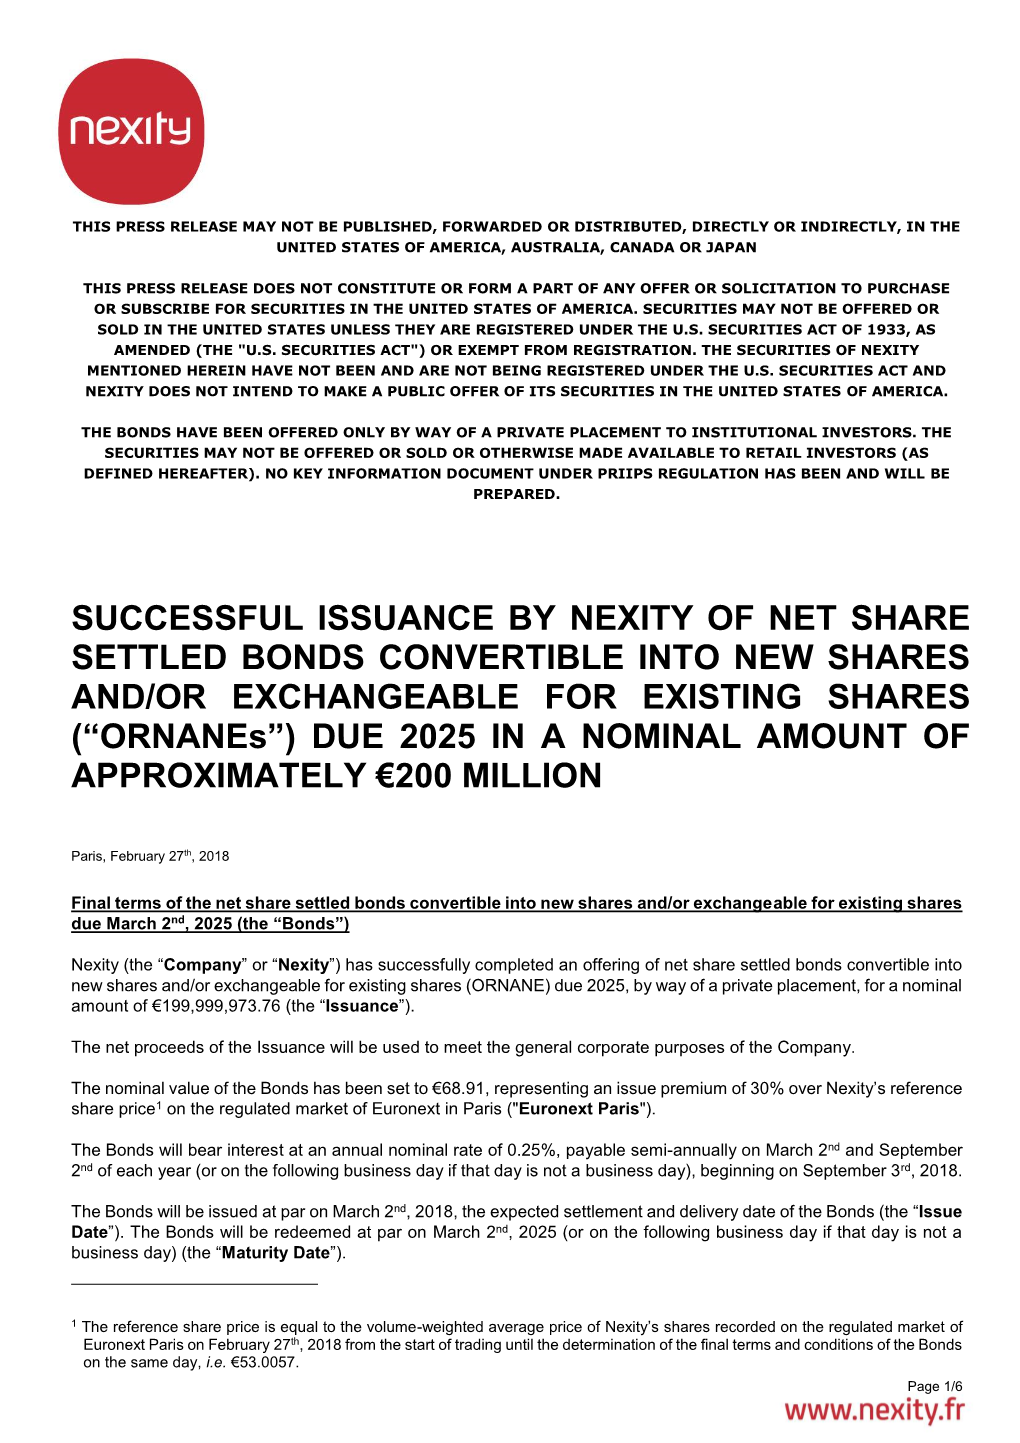 Successful Issuance by Nexity of Net Share Settled